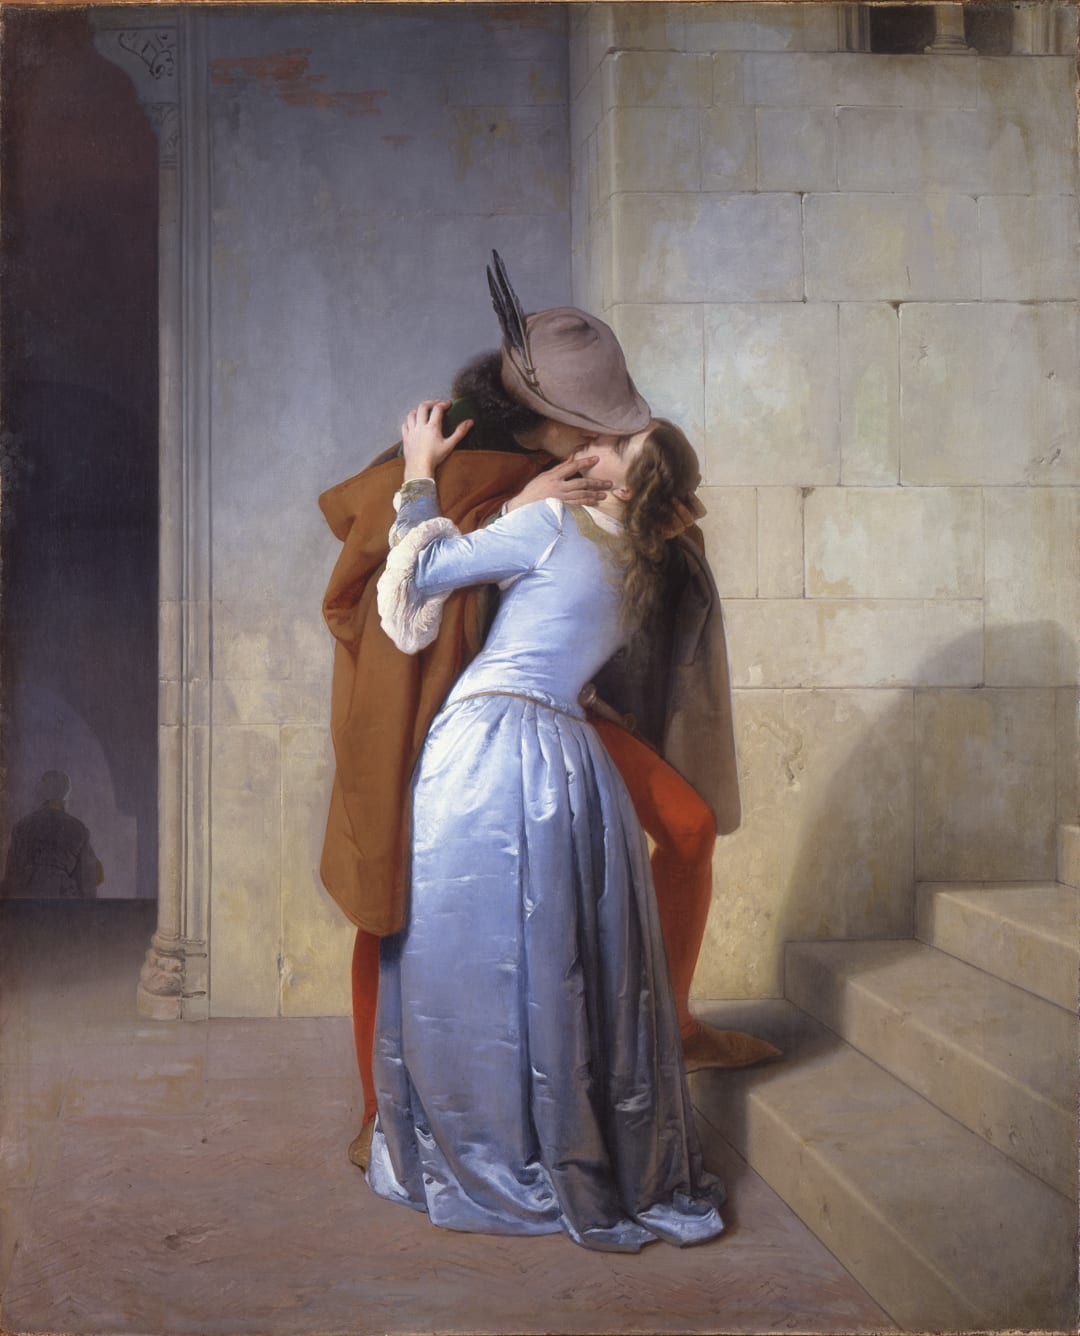 The Wick - Il Bacio (The Kiss), Conceived in 1896, digitised in 2021
DAW® (Digital Artwork)